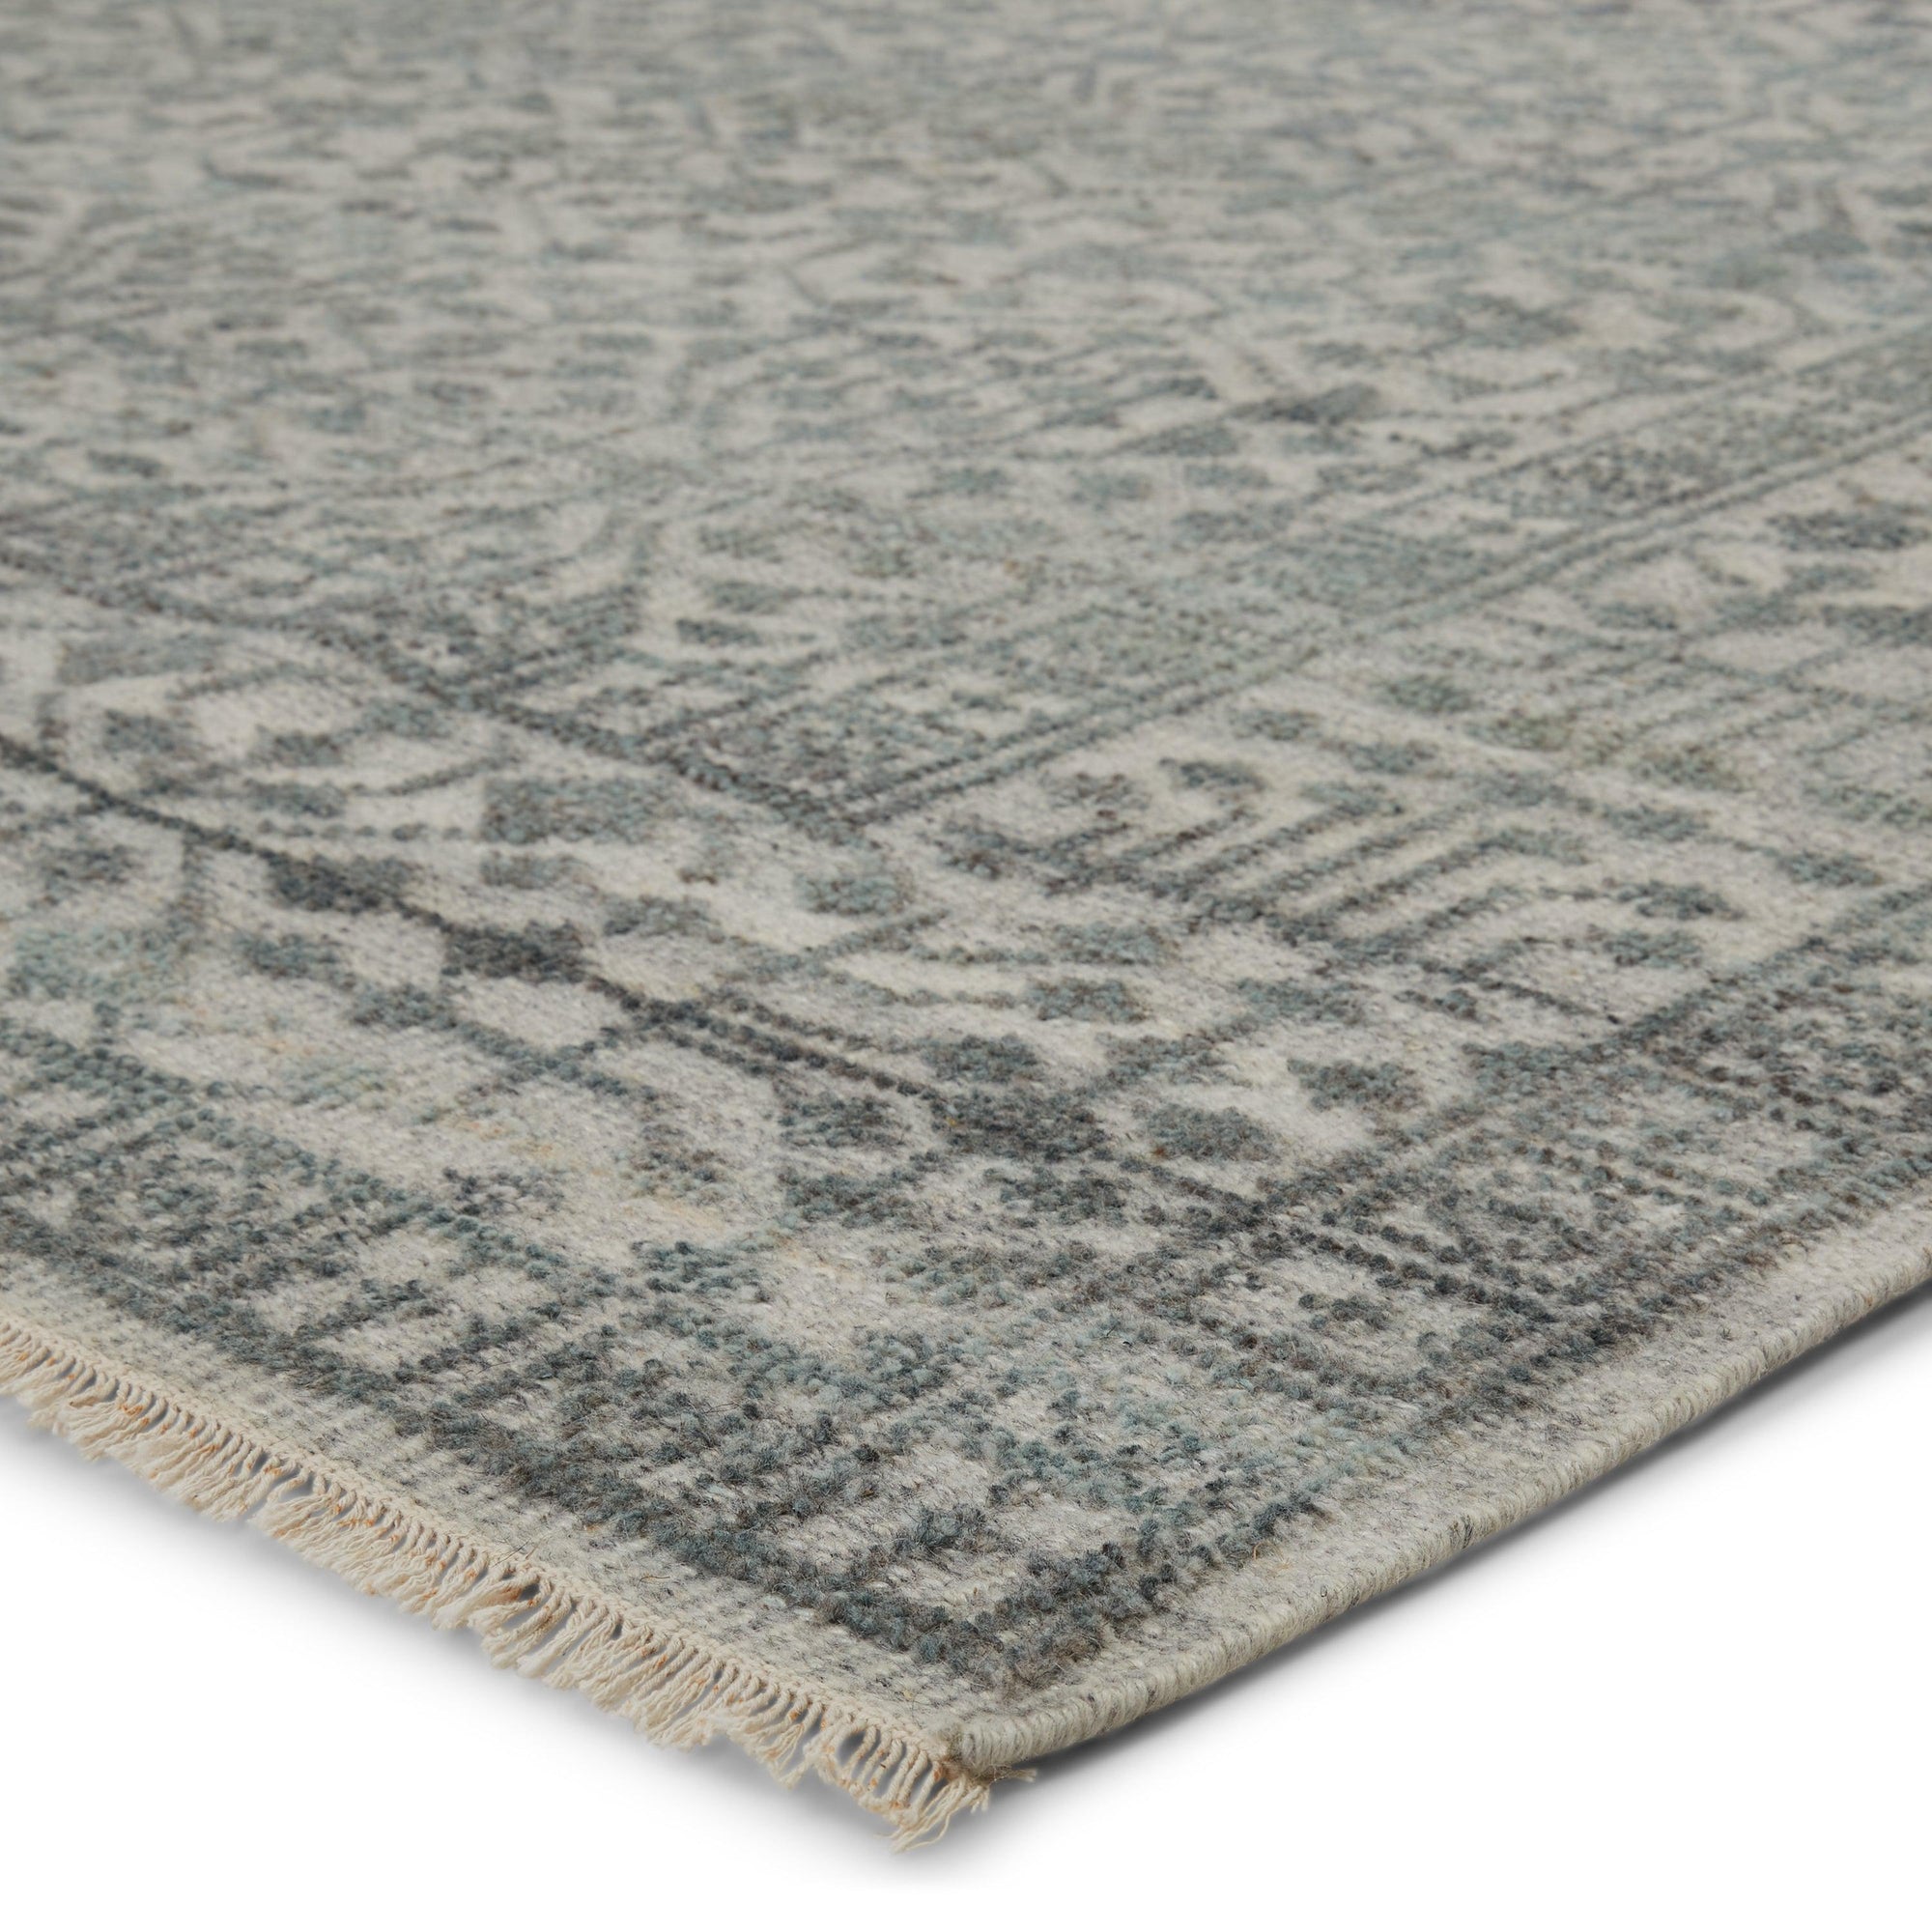 Rugs by Roo | Jaipur Living Arinna Hand-Knotted Tribal Gray Light Blue Area Rug-RUG145659